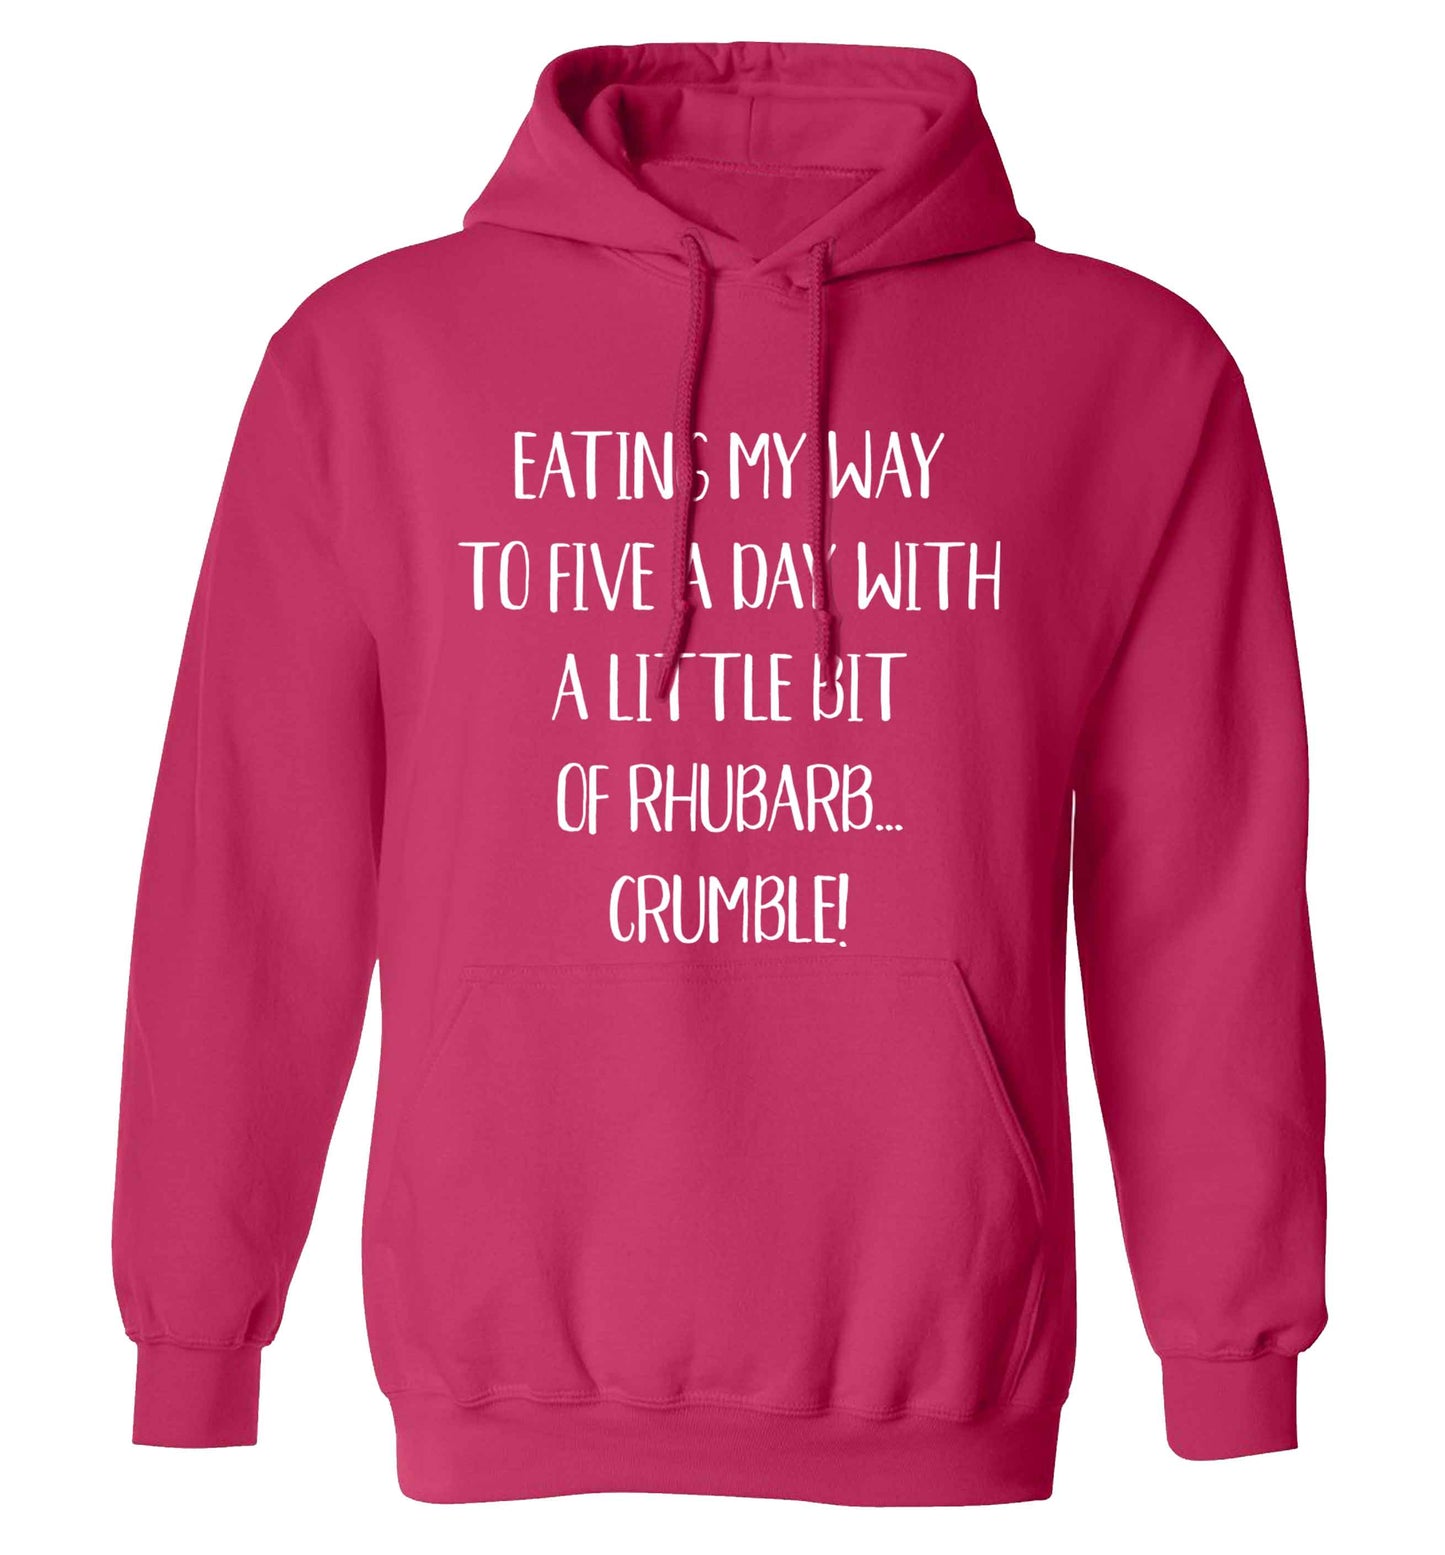 Eating my way to five a day with a little bit of rhubarb crumble adults unisex pink hoodie 2XL